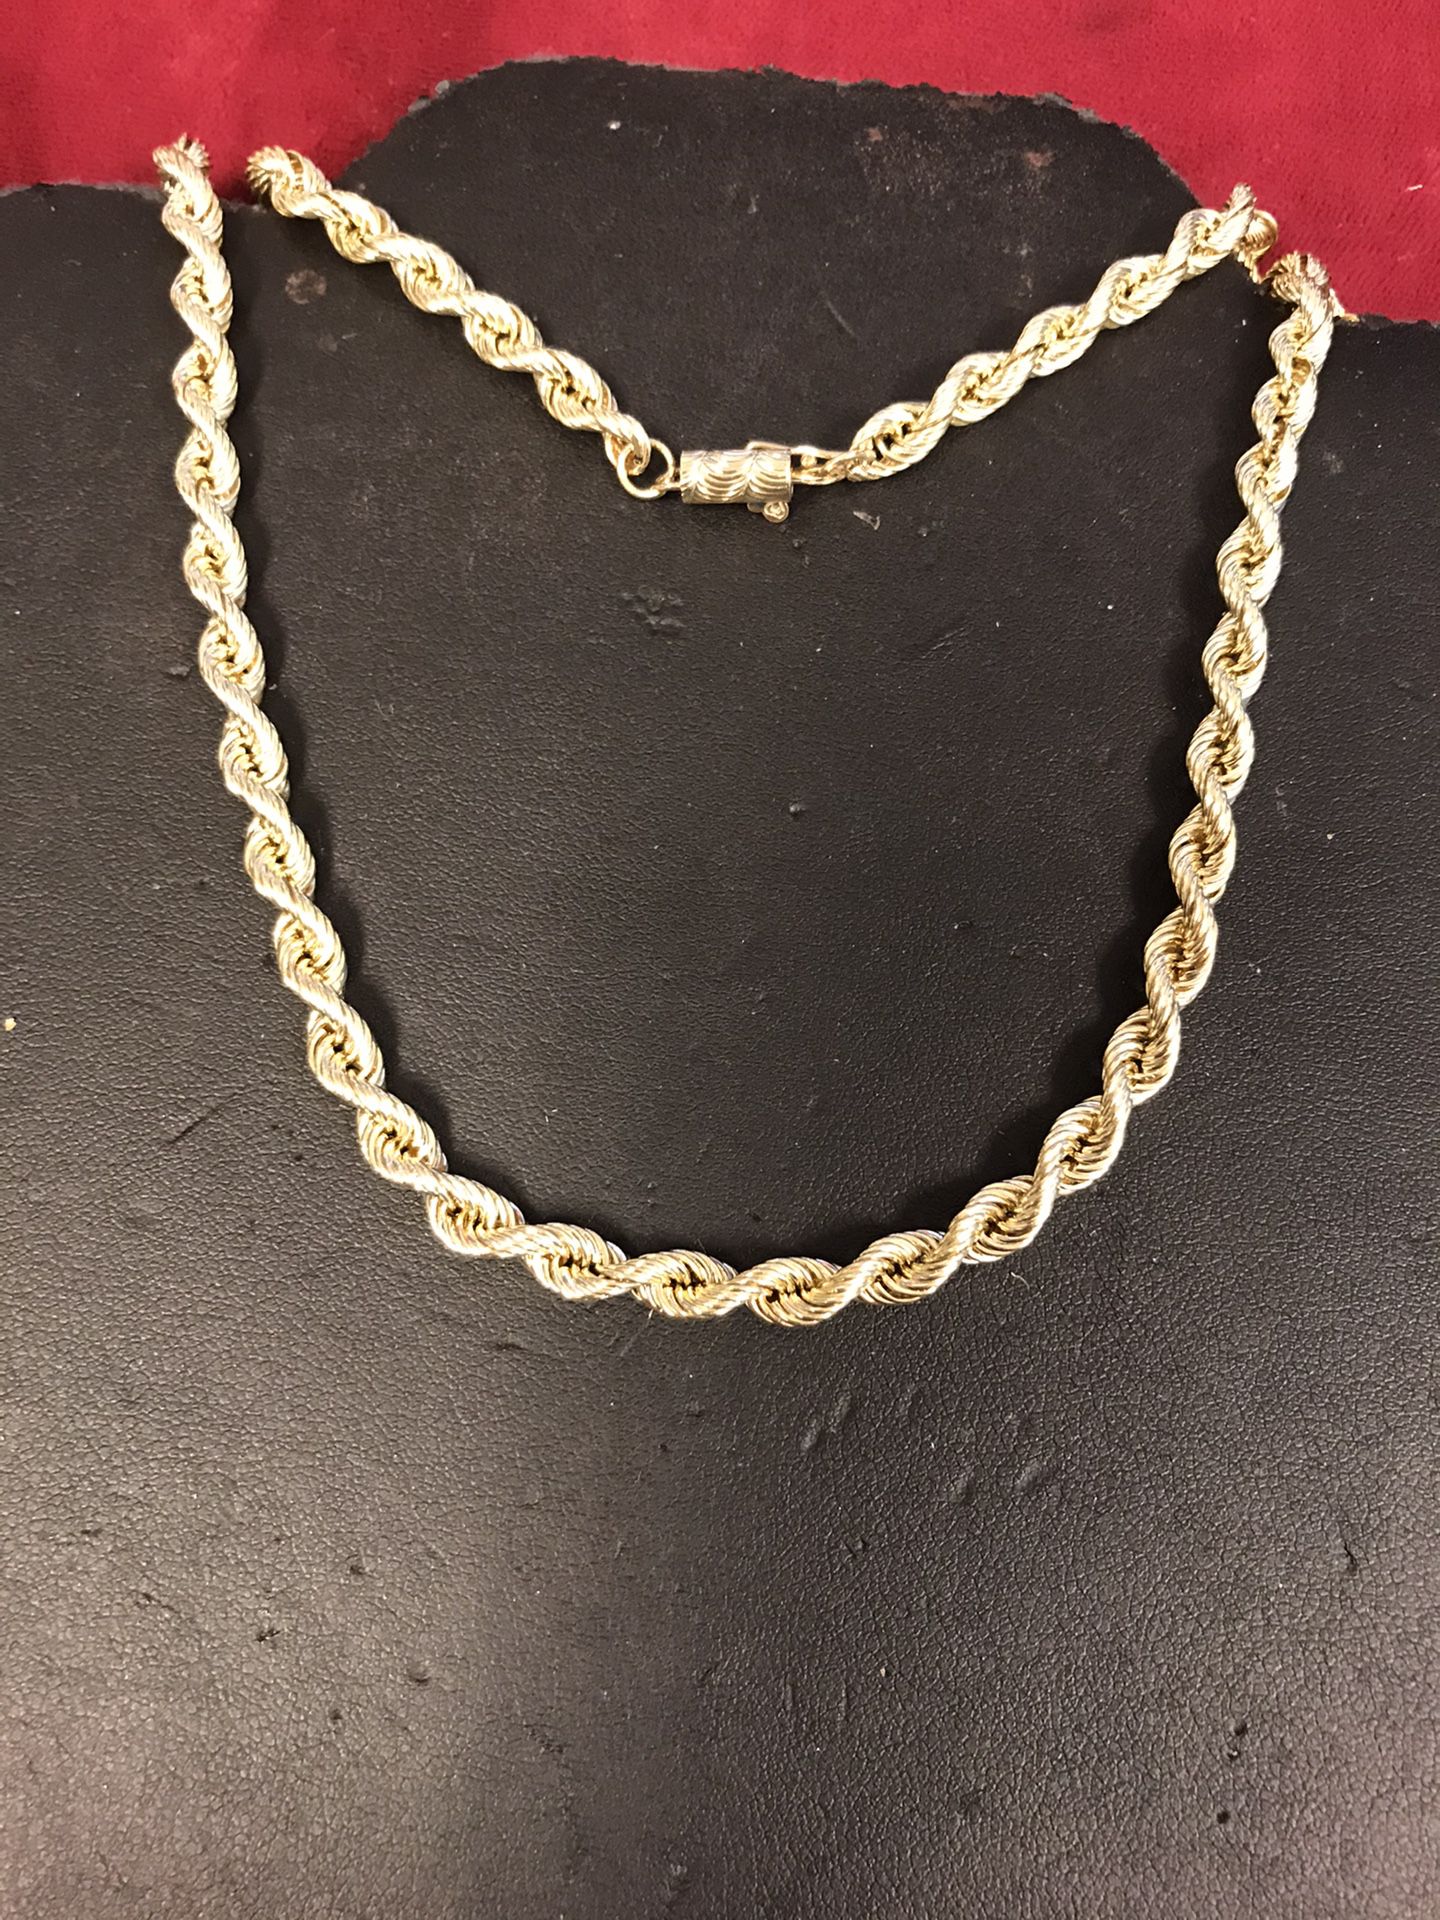 14 K gold rope chain